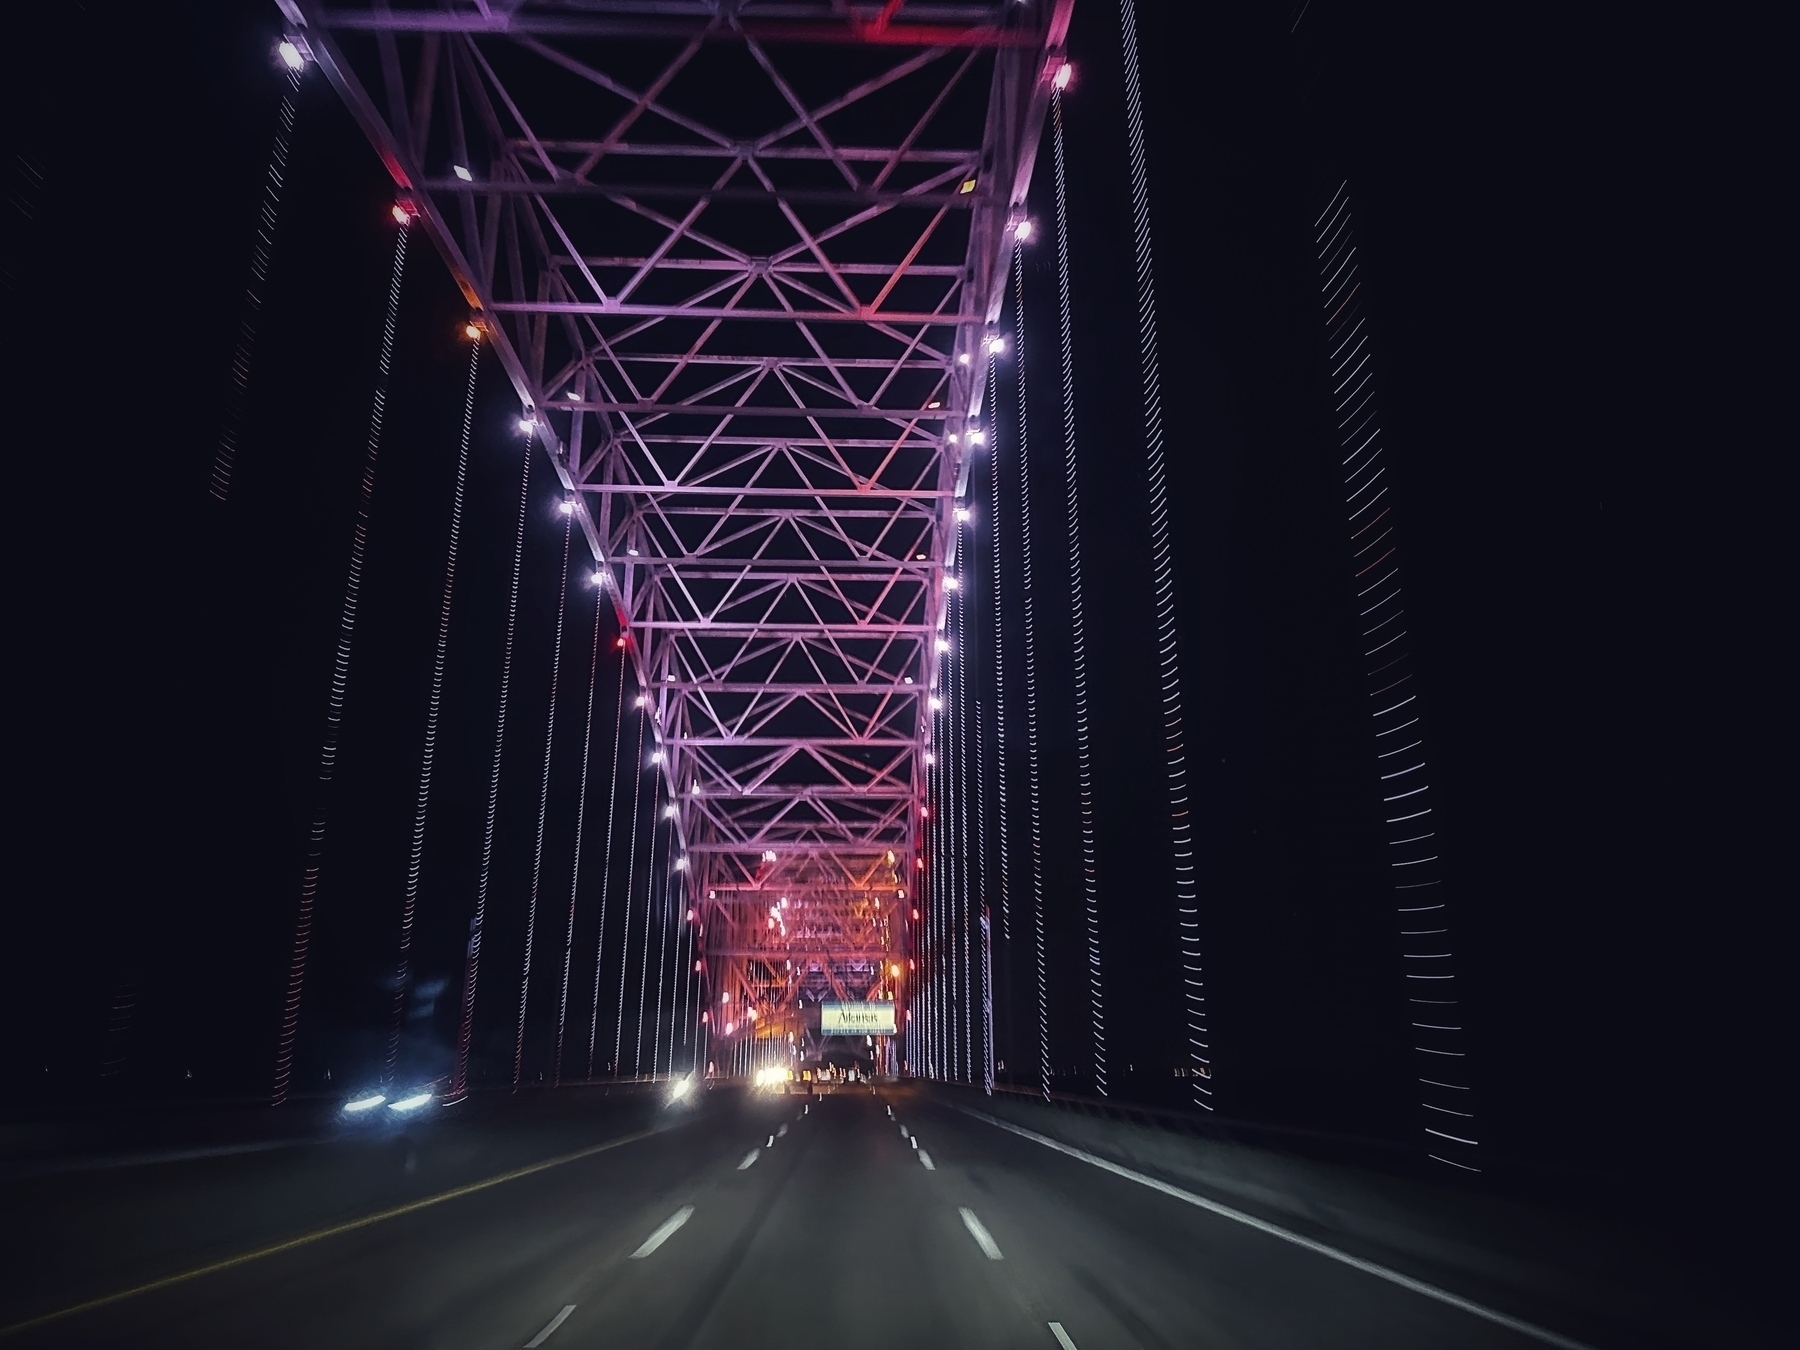 View of a bridge over the Mississippi River at night as someone drives over it. The bridge is lit up in shades of purple and pink with white pinpricks. The highway below is lit by the bridge, oncoming headlights, and the lights of the photographer’s vehicle. 